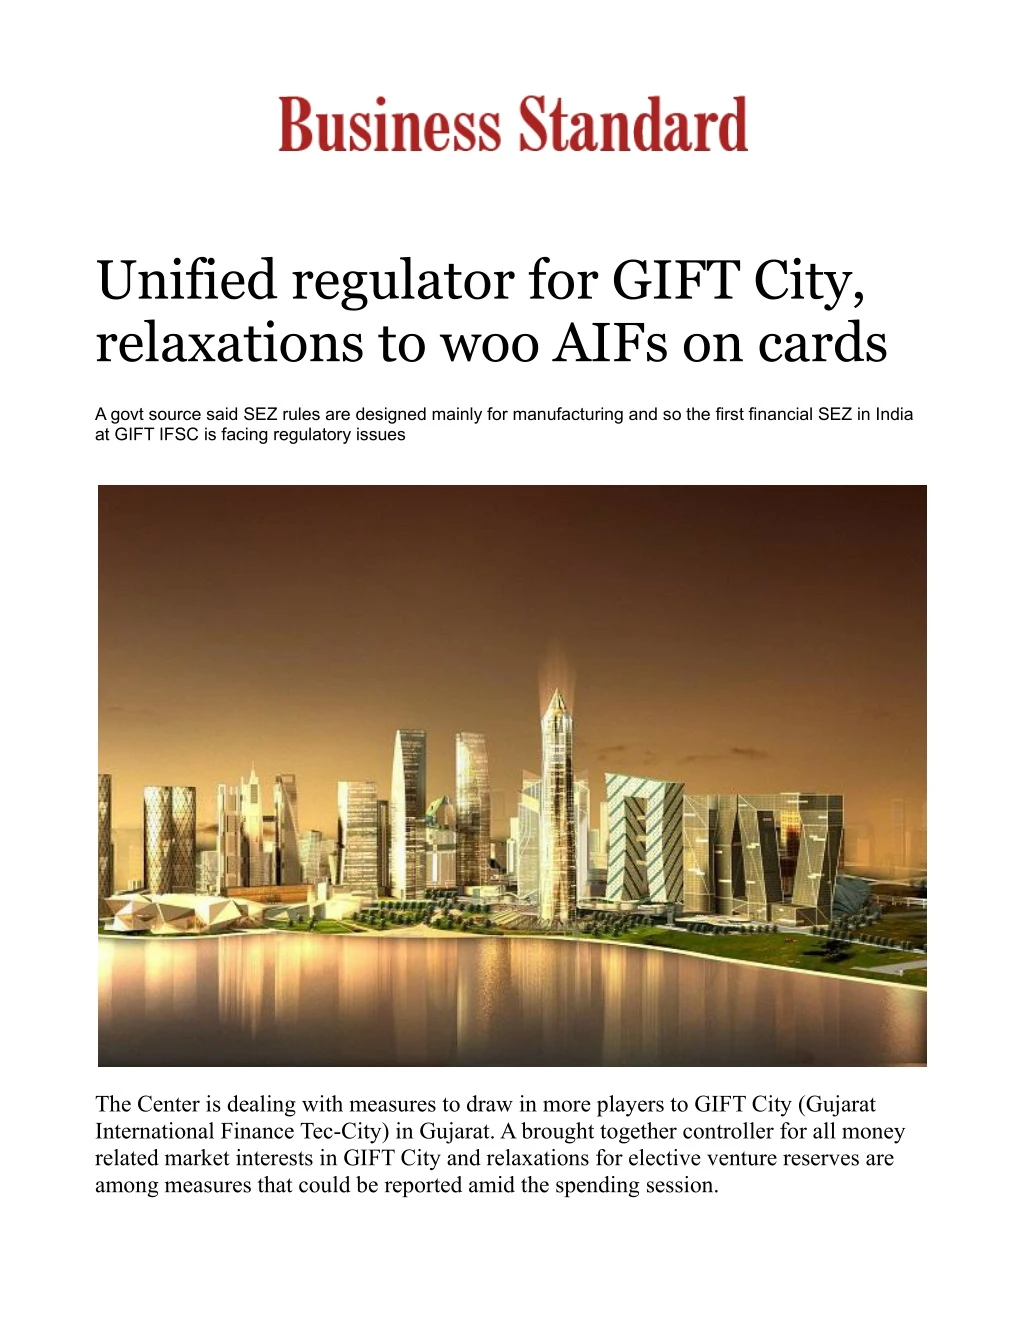 unified regulator for gift city relaxations